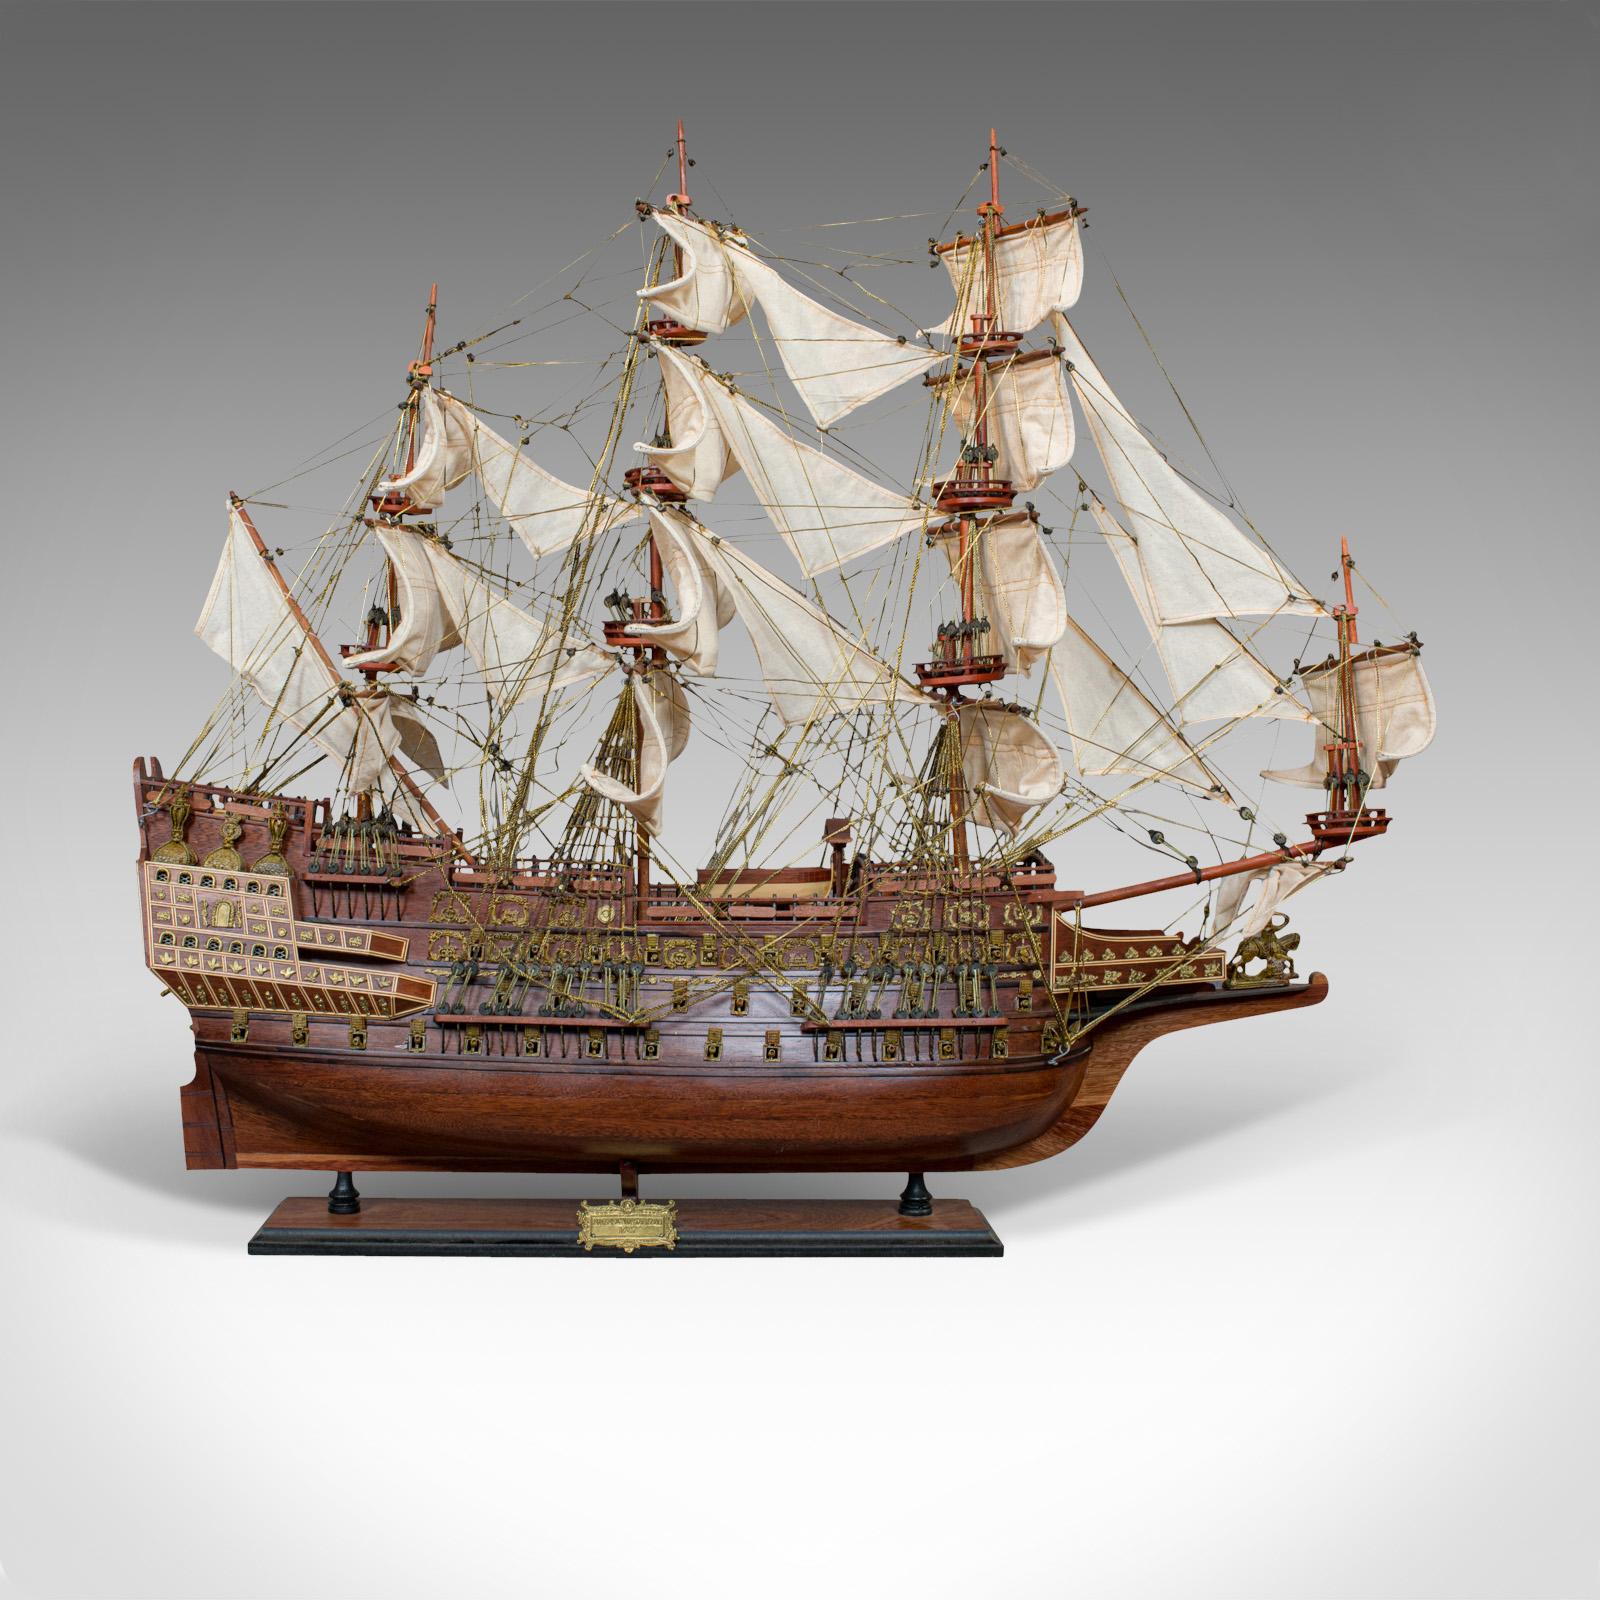 This is a large vintage model of the Sovereign of the Seas. An English, mahogany collectible ship on display stand and dating to the 20th century.

Sovereign of the Seas was personally ordered by King Charles I to carry 102 guns, despite being a